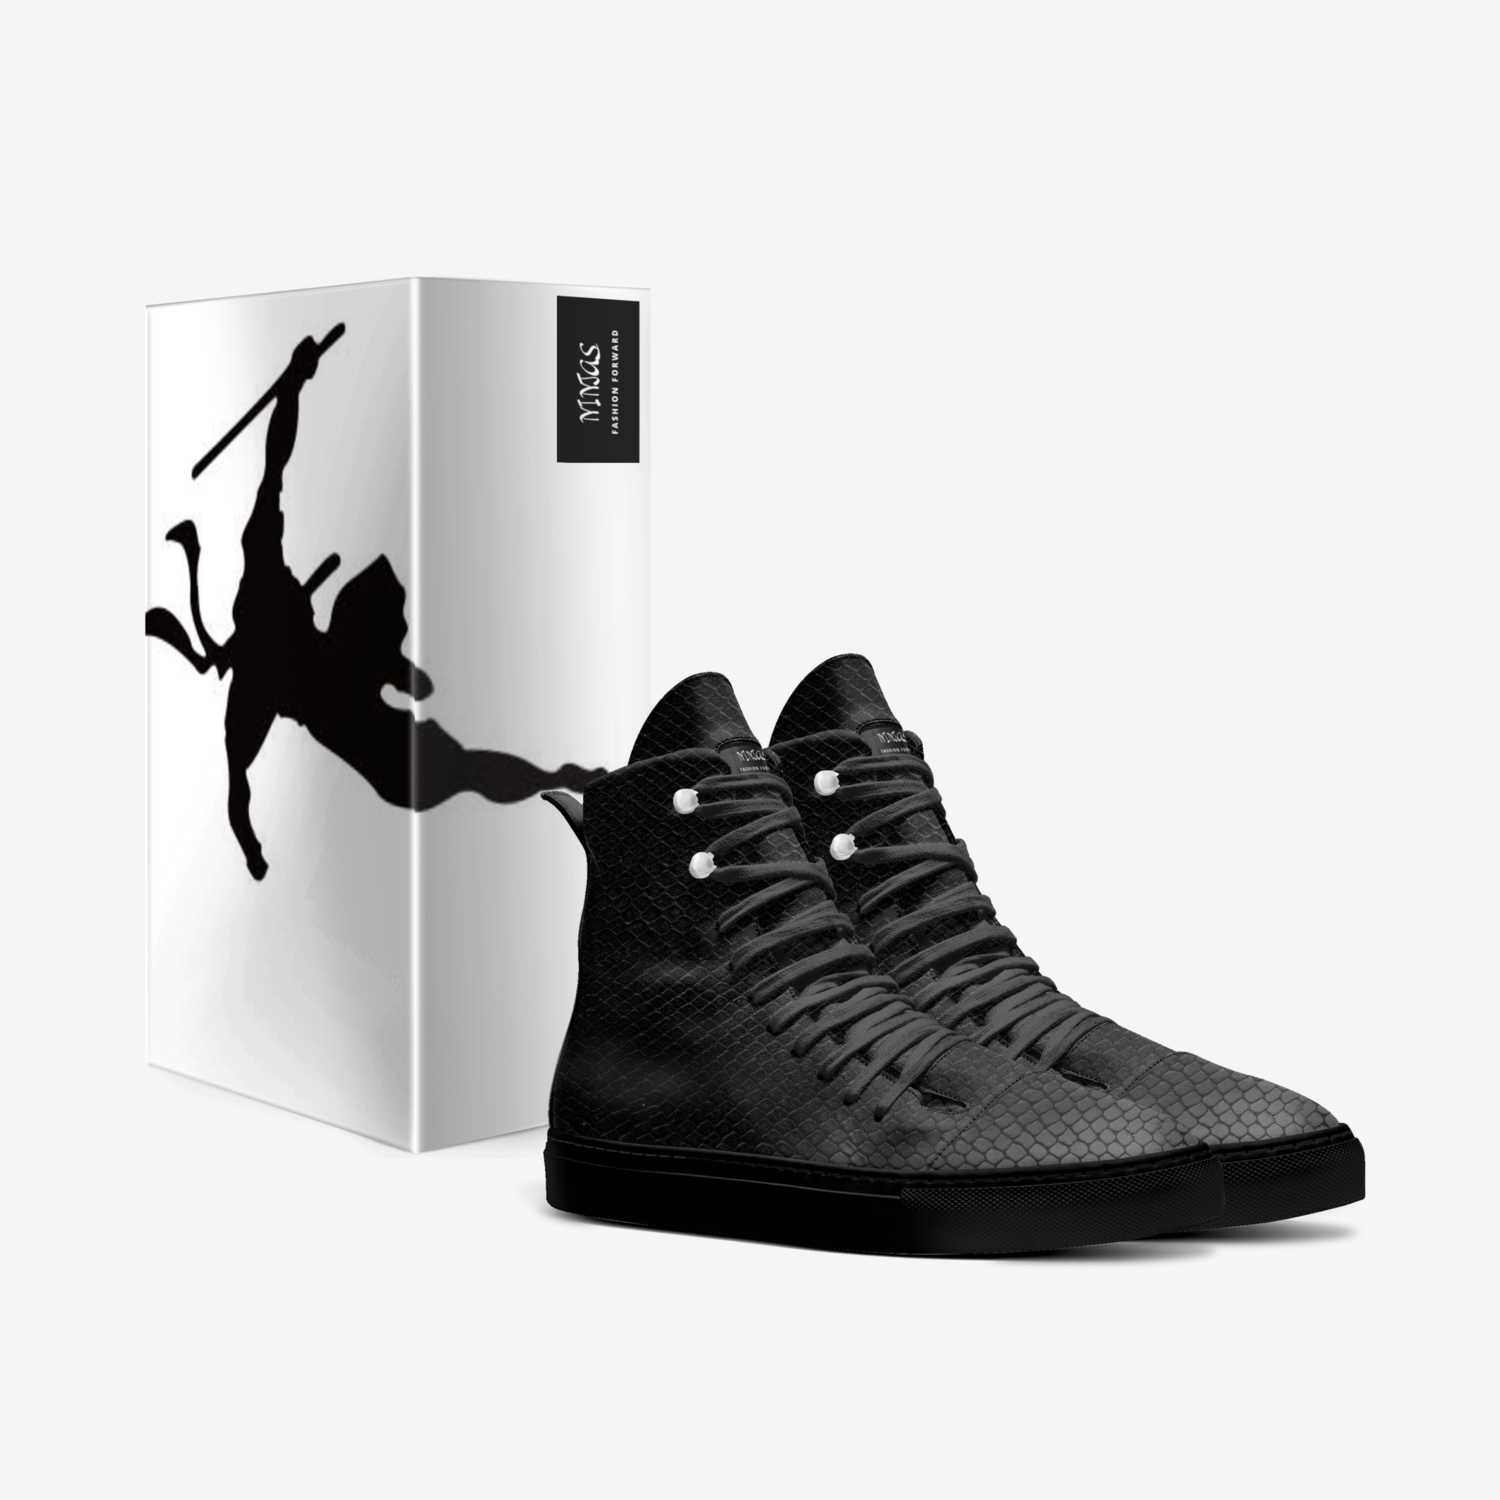 NINJAS  custom made in Italy shoes by Cedric Harris | Box view